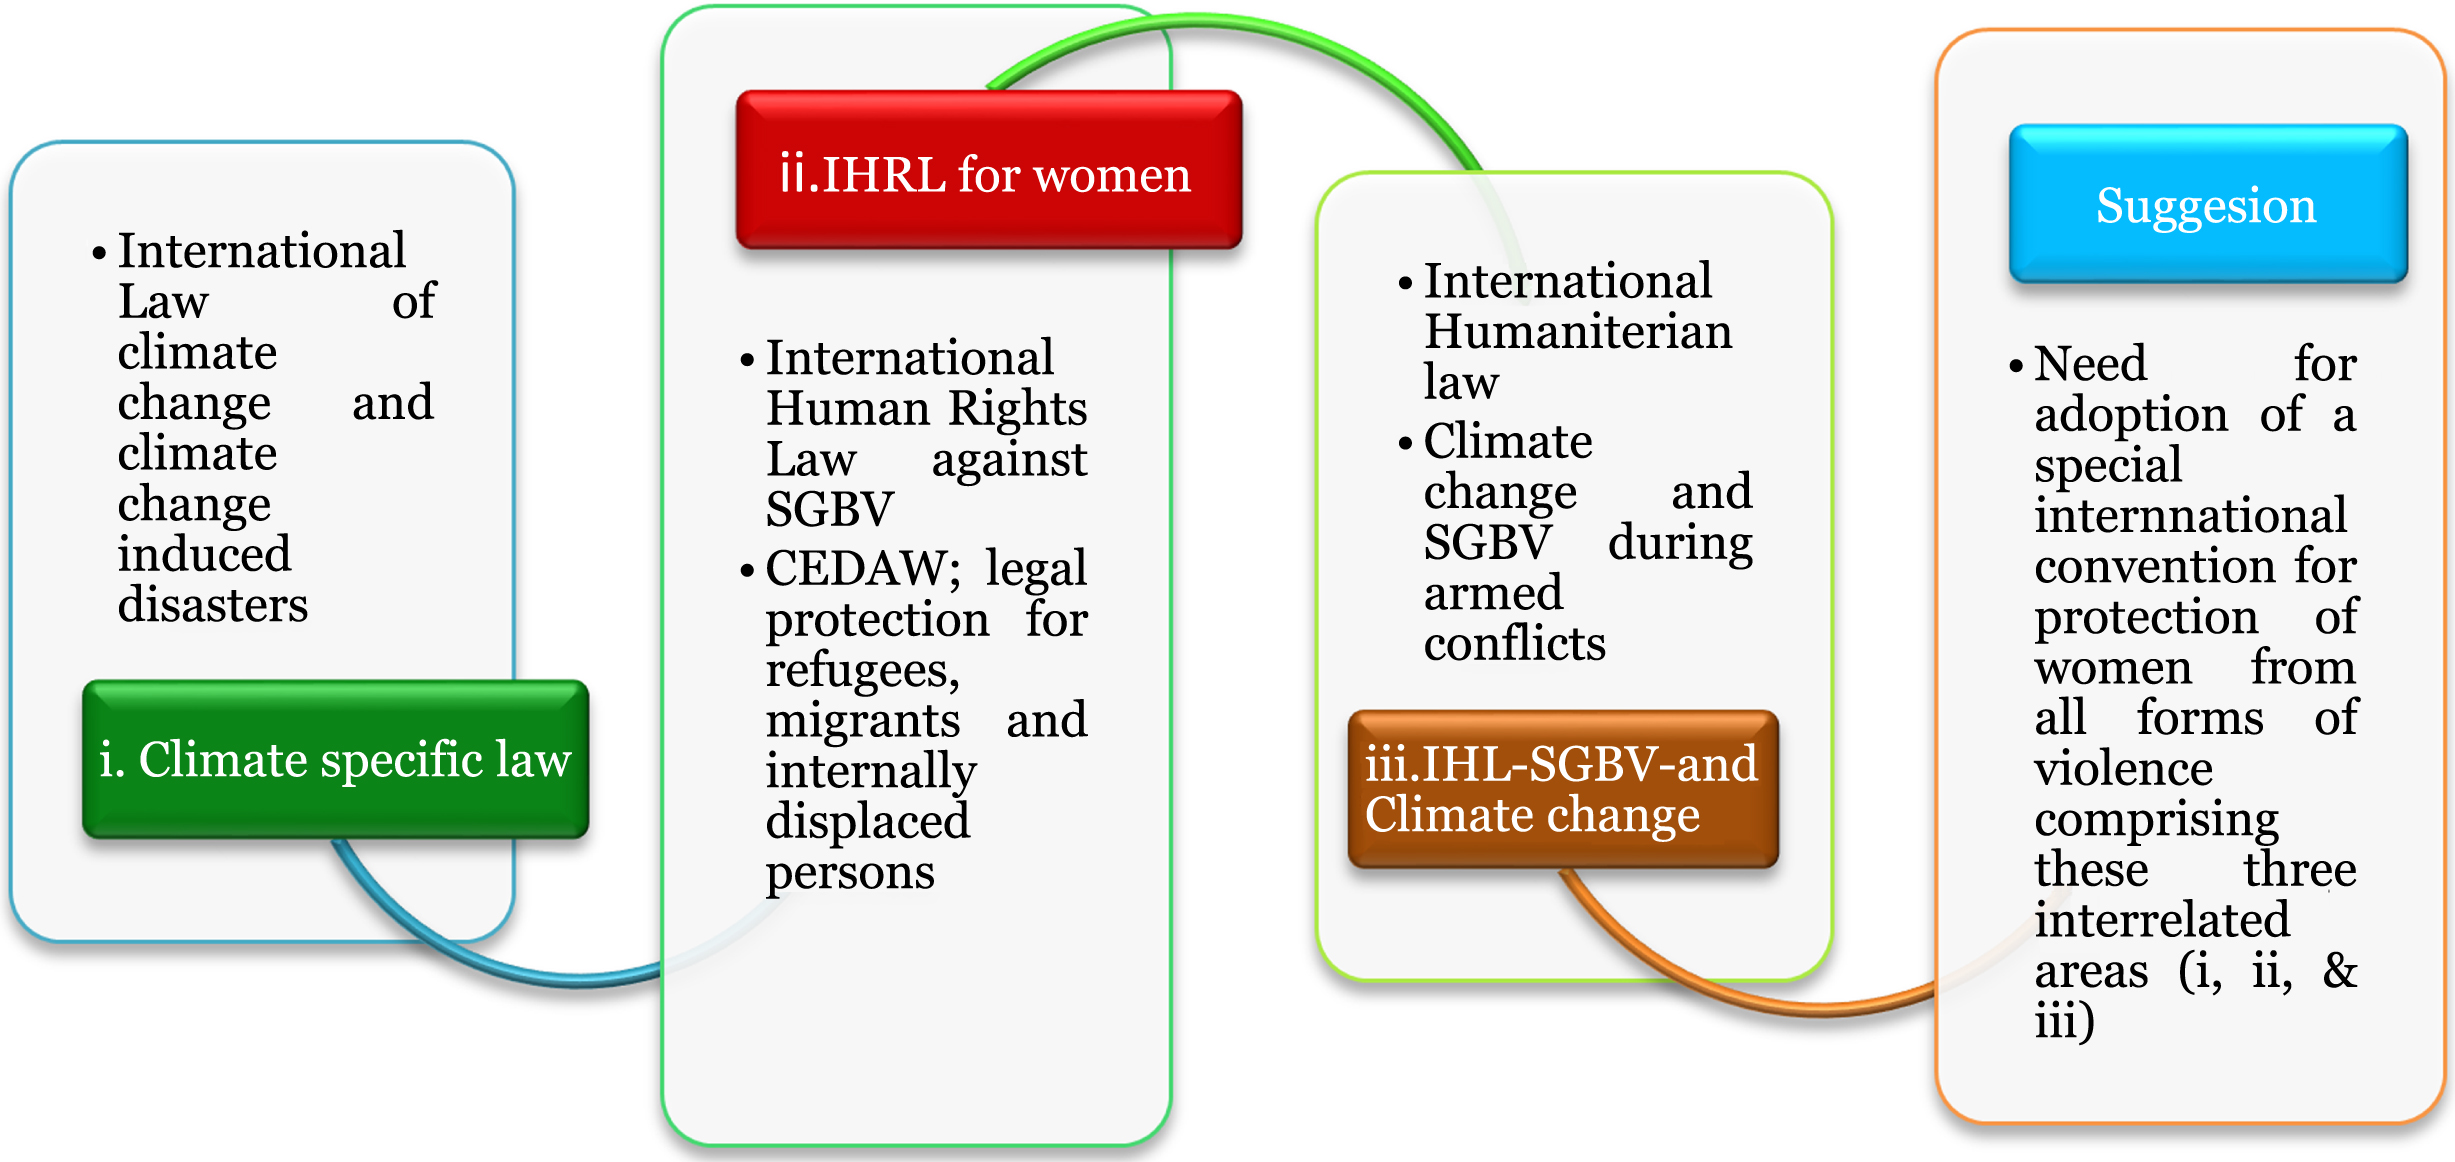 Showing the inter-linkage between the climate specific and other related laws to dealing with climate change heightened SGBV against women and girls.